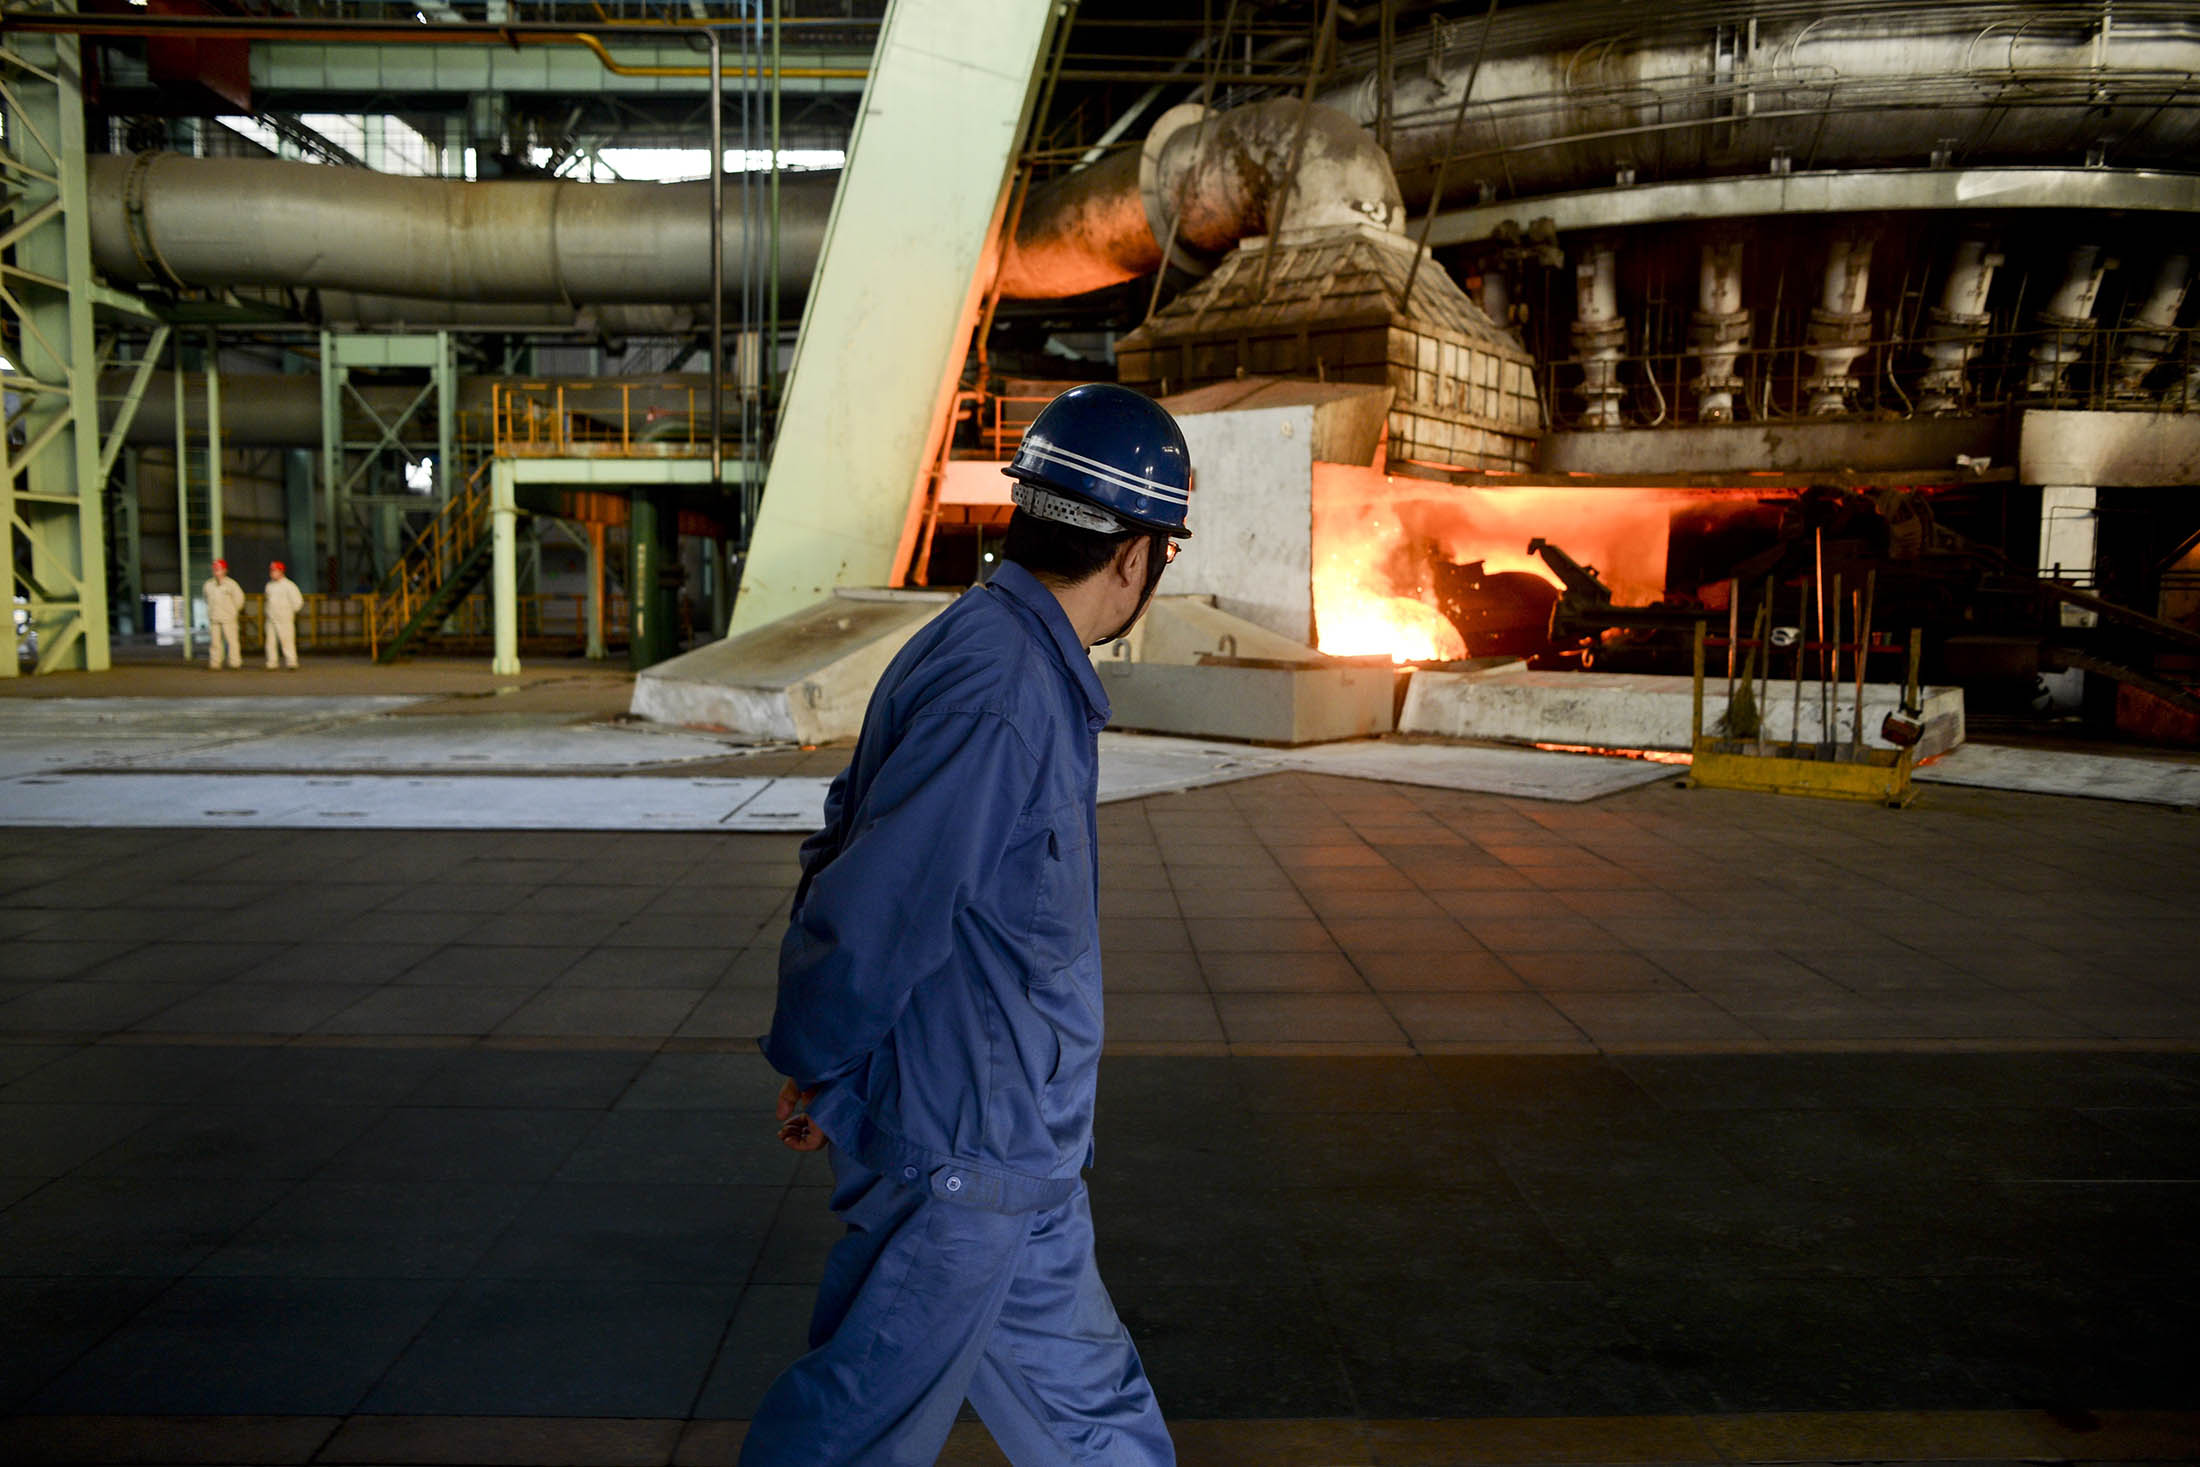 A worker walks past a furnace at a steel plant in China's northern Hebei province.
